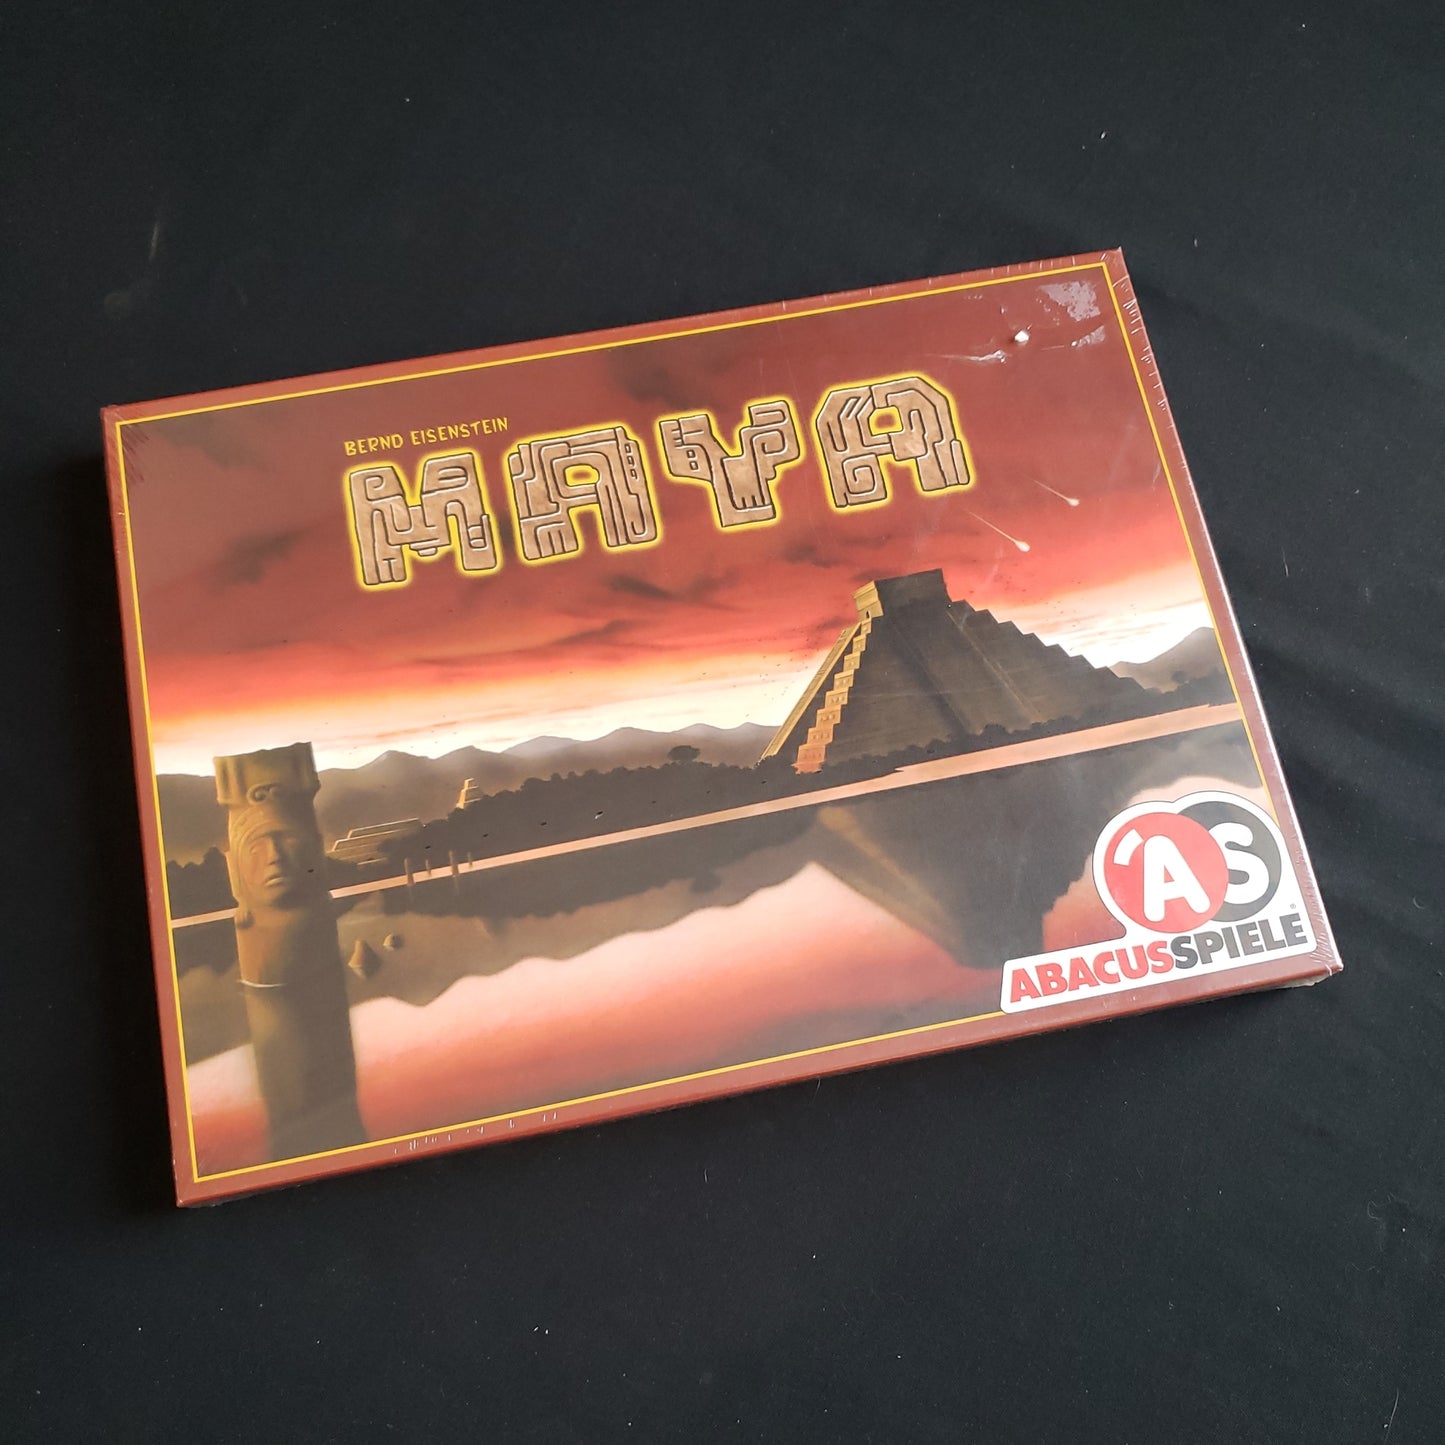 Image shows the front cover of the box of the Maya board game